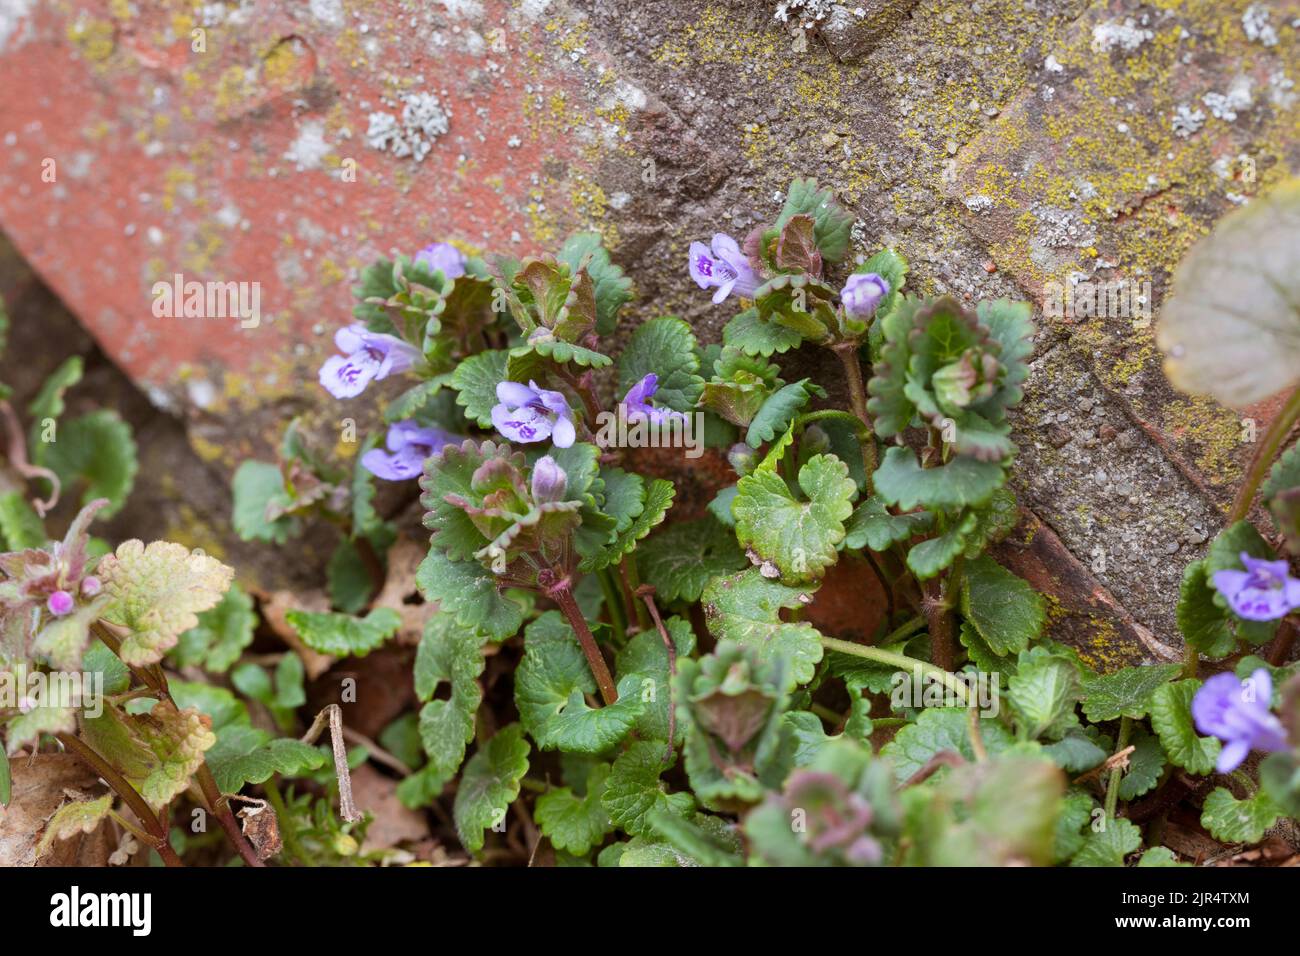 gill-over-the-ground, ground ivy (Glechoma hederacea), grows in paving gap, Germany Stock Photo